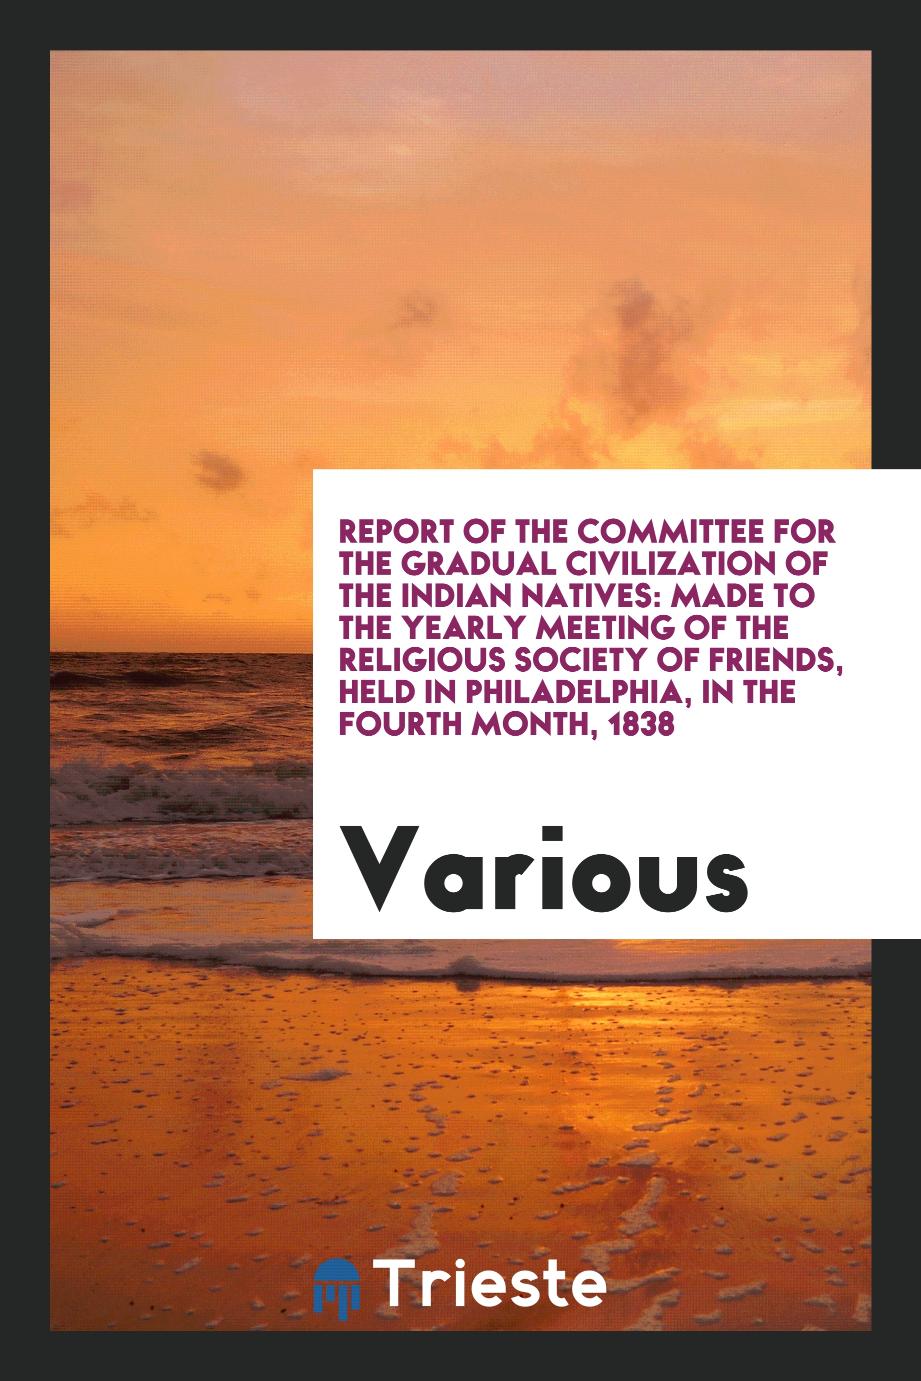 Report of the Committee for the Gradual Civilization of the Indian Natives: Made to the Yearly Meeting of the Religious Society of Friends, Held in Philadelphia, in the Fourth Month, 1838